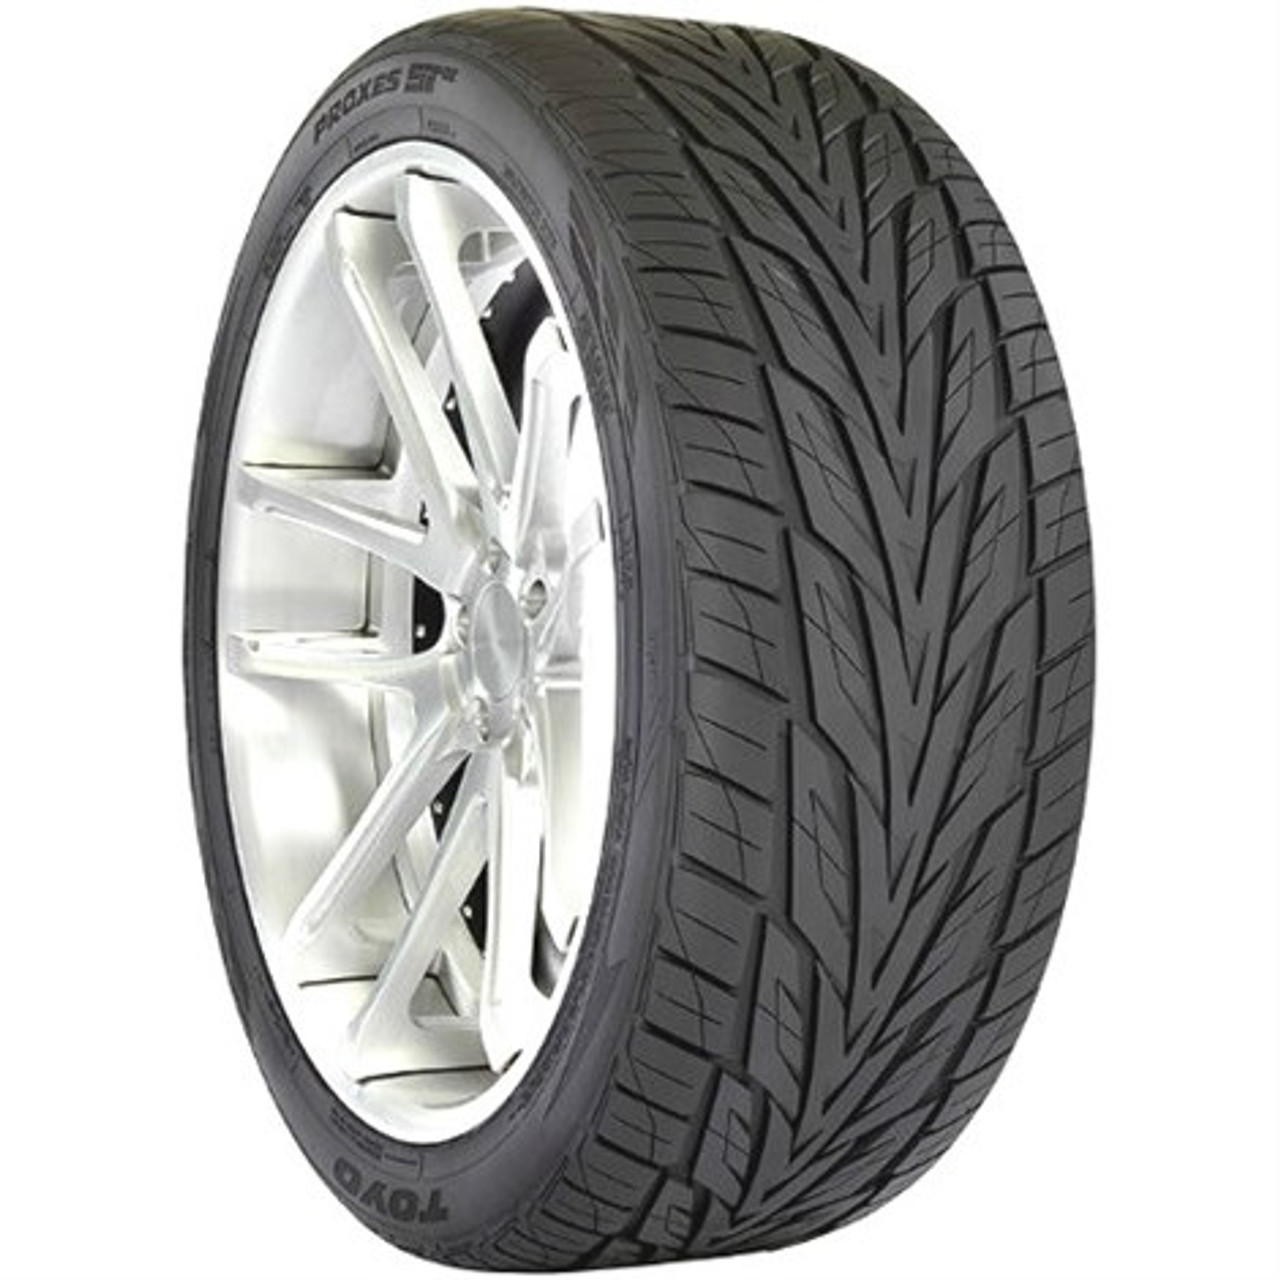 Toyo Proxes ST III Tire - 275/55R20